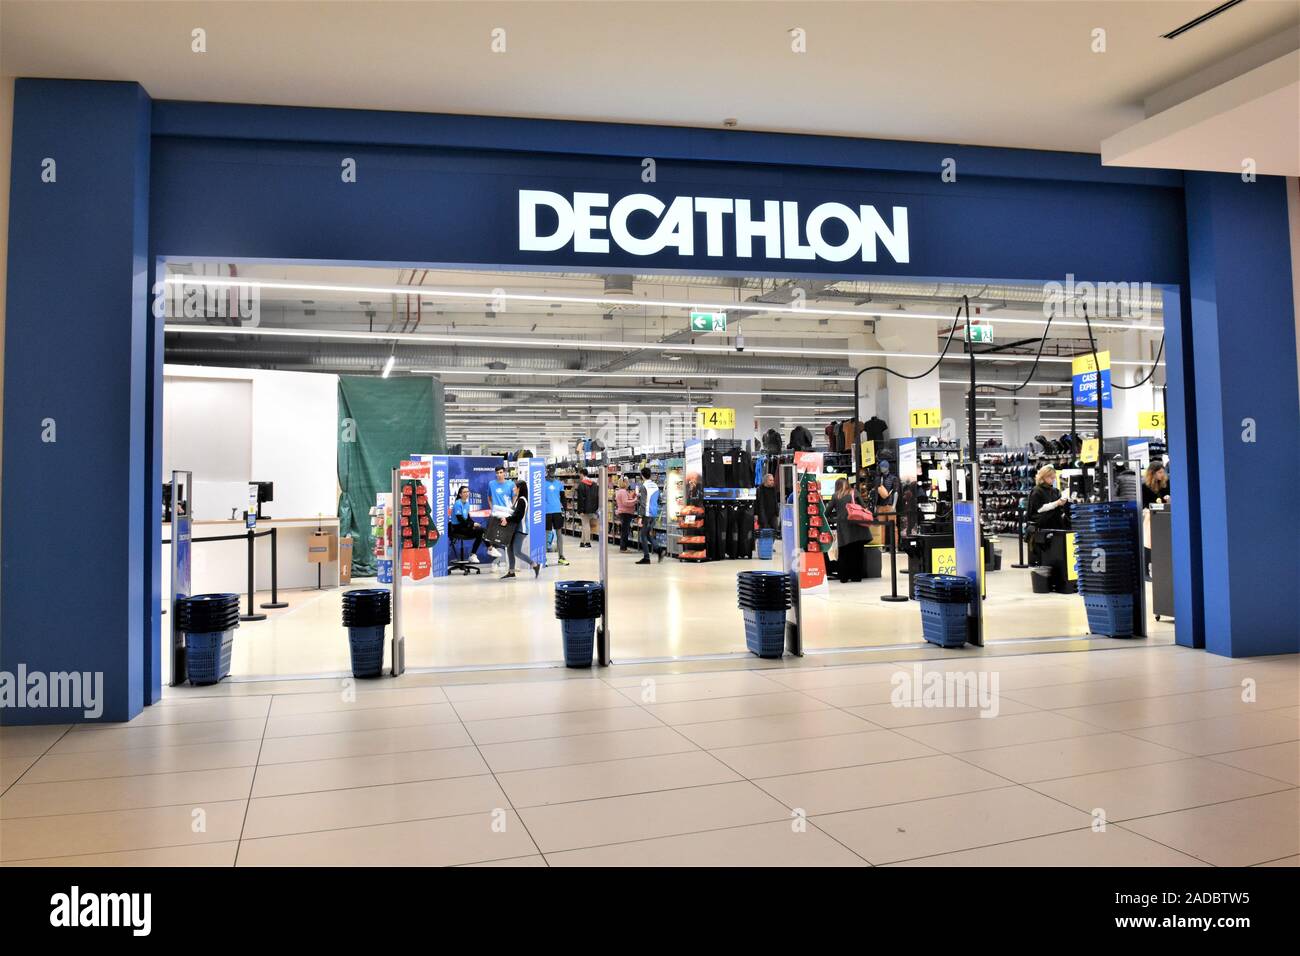 DECATHLON STORE ENTRANCE IN EUROMA 2 